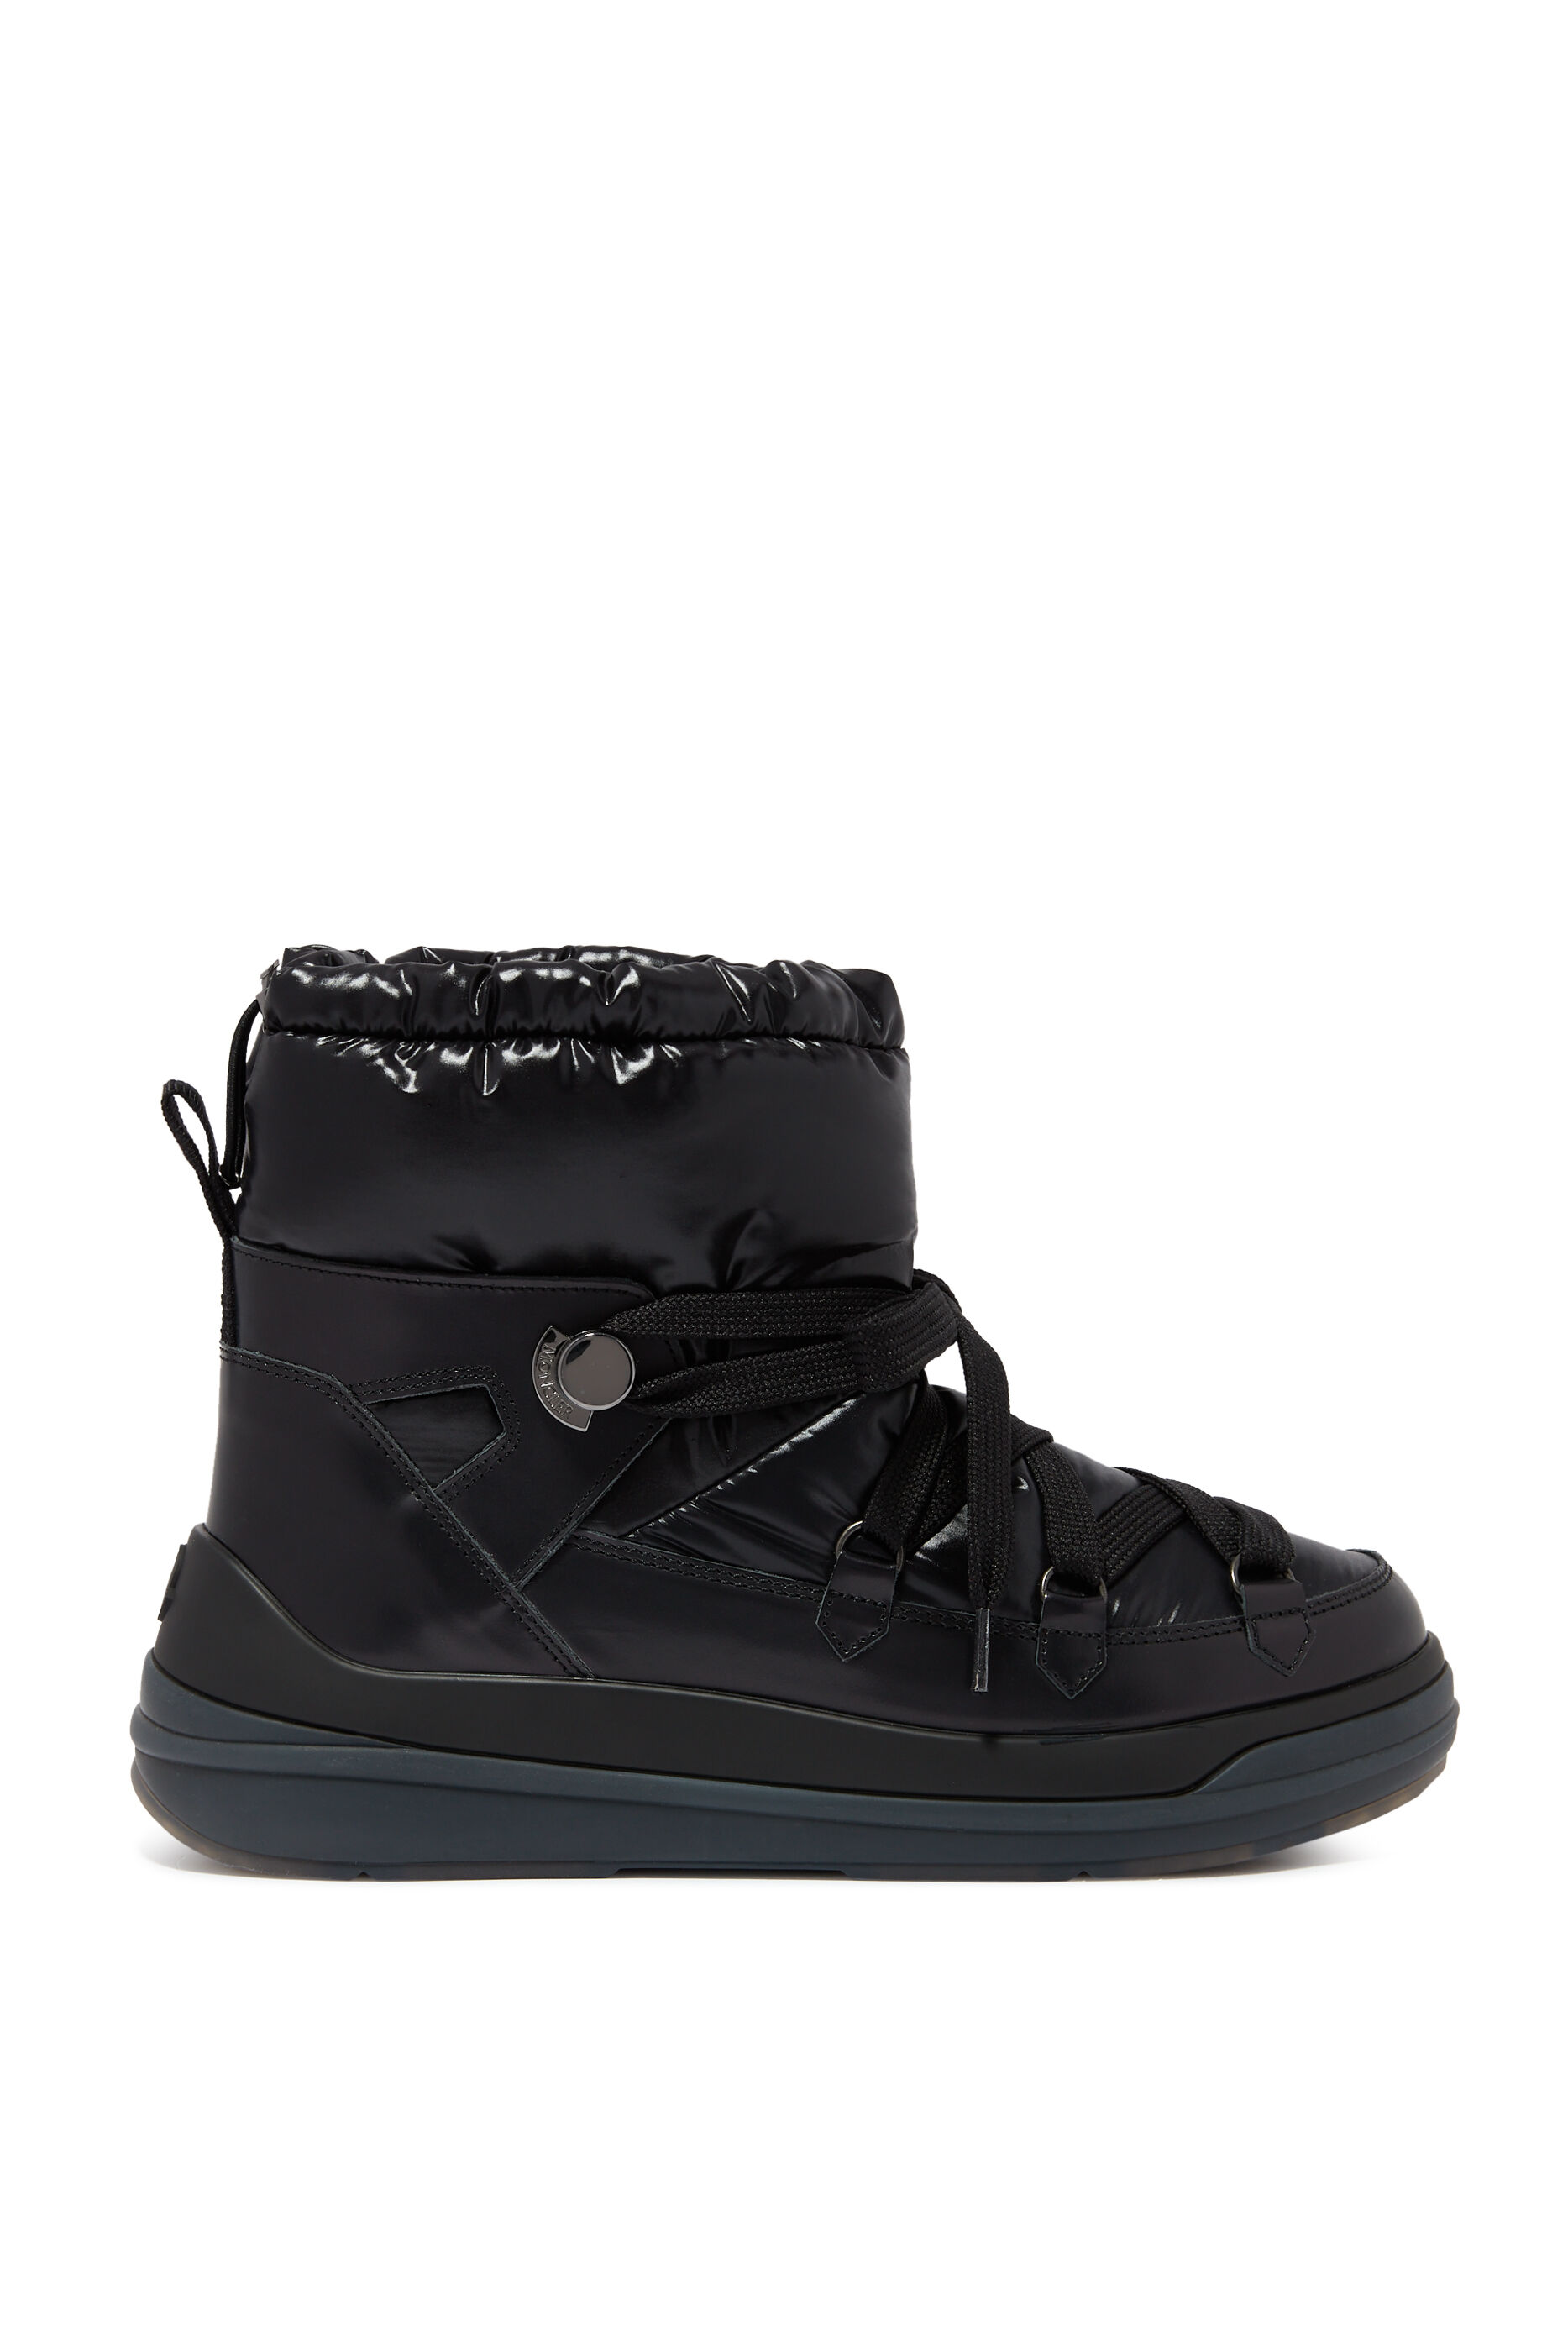 Buy Moncler Ankle-Length Snow Boots 